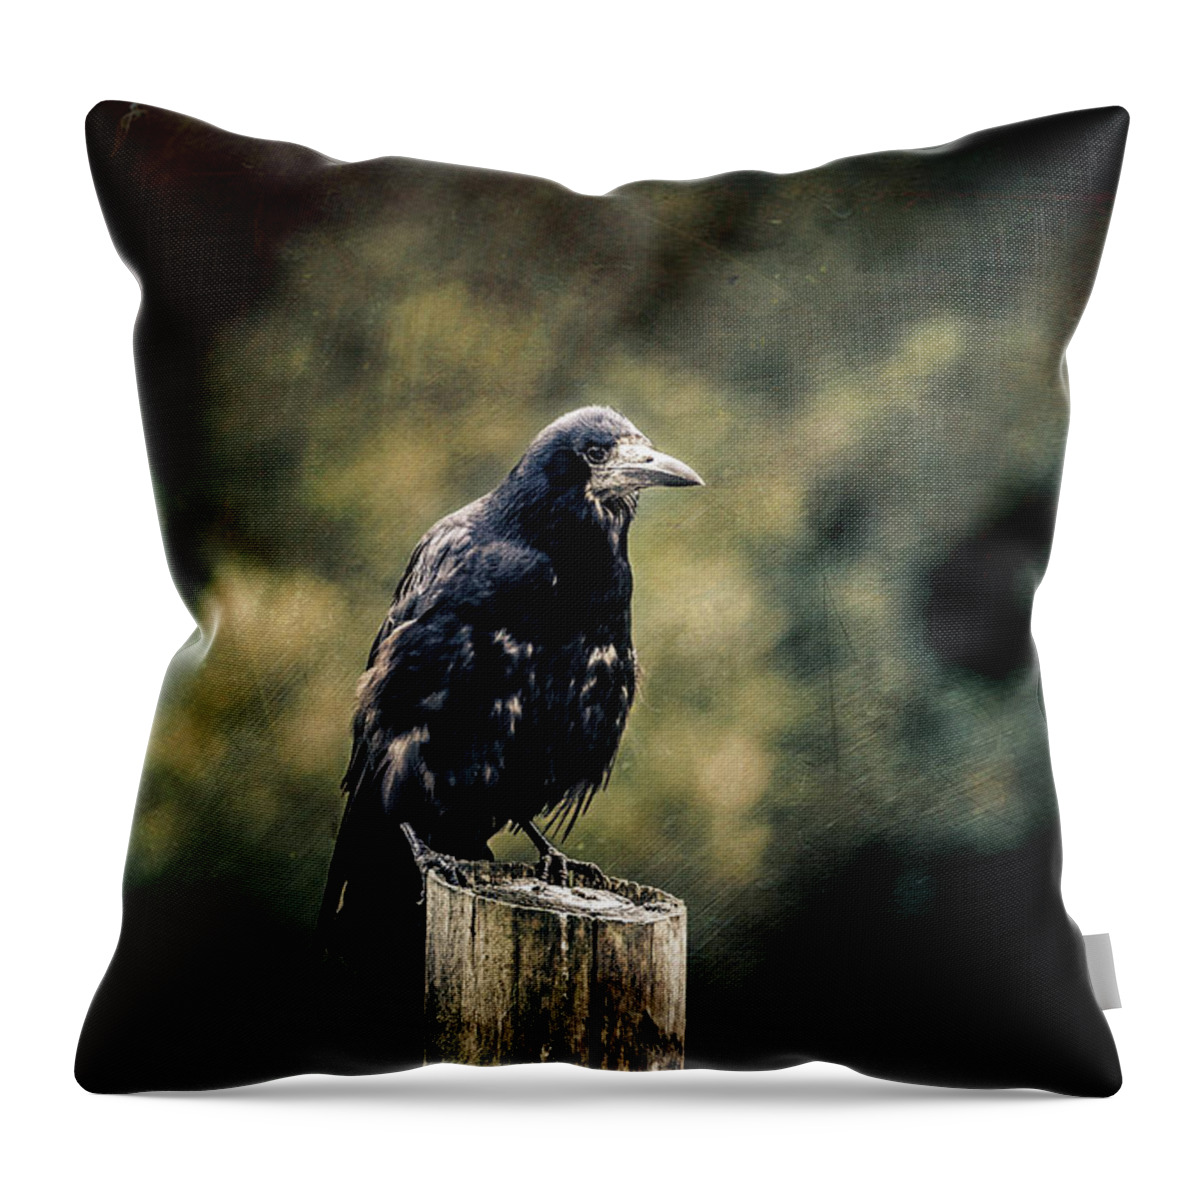 Feathers Throw Pillow featuring the photograph Rook perched on a post with dark and moody background by Jane Rix